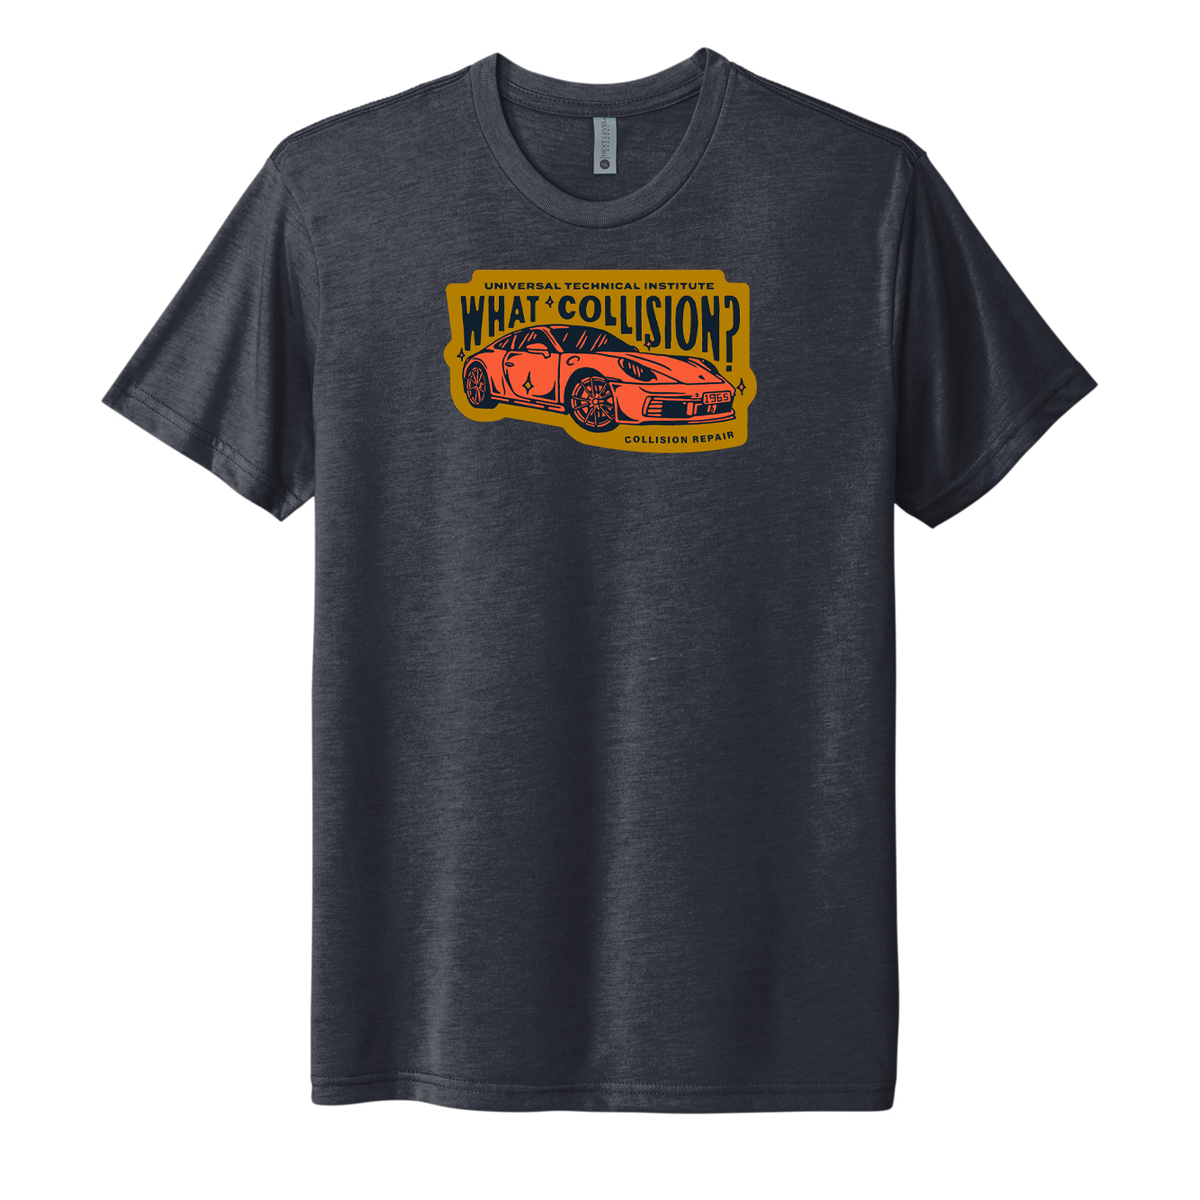 What Collision Graphic T-Shirt